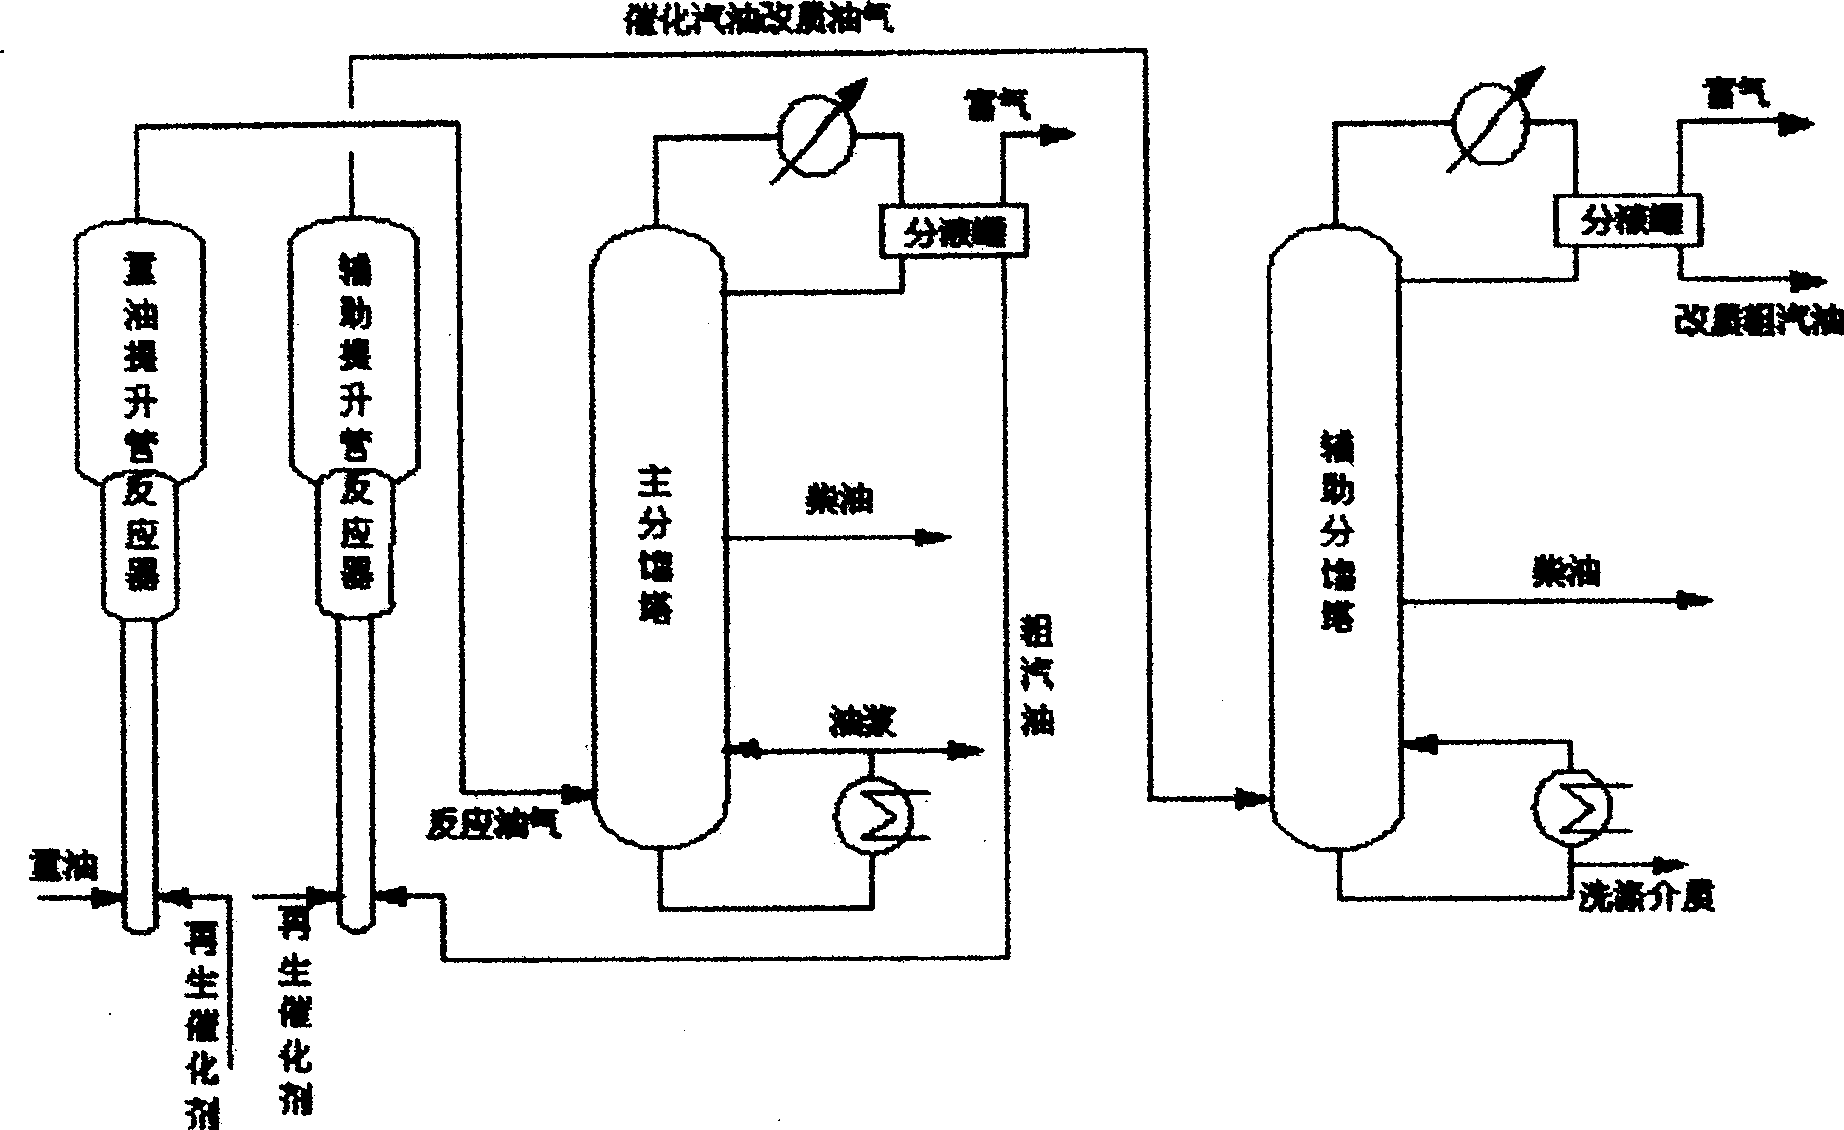 Auxiliary fractional tower and its gasoline catalyzing and olefine reducing modification process